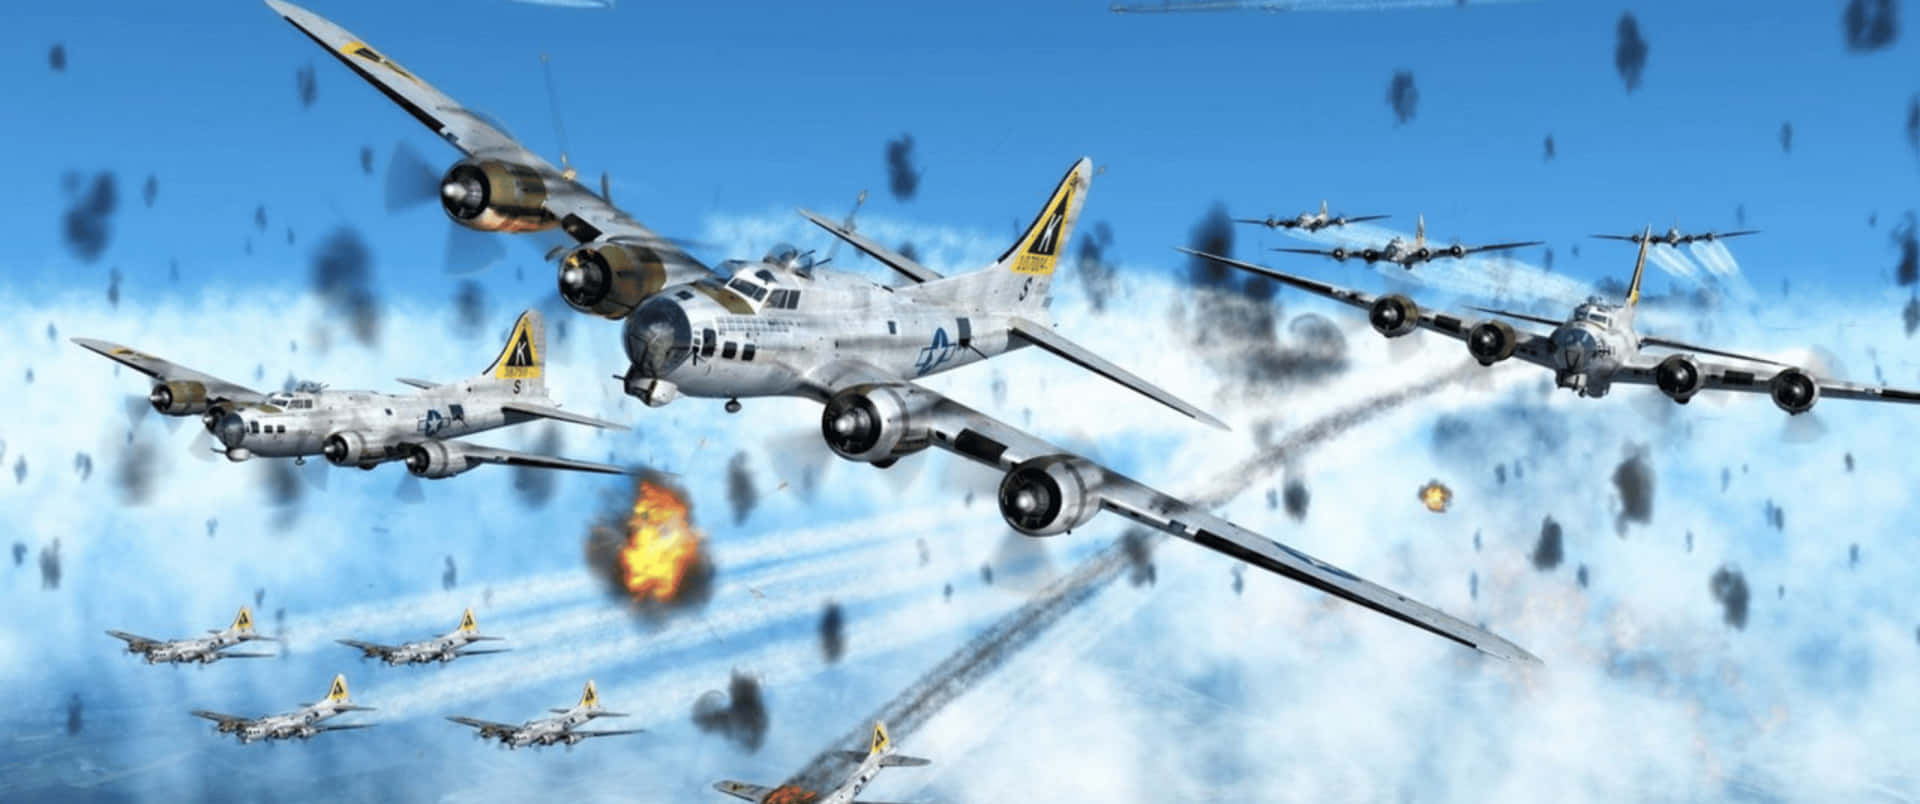 3440x1440p Planes Shooting Missiles Background